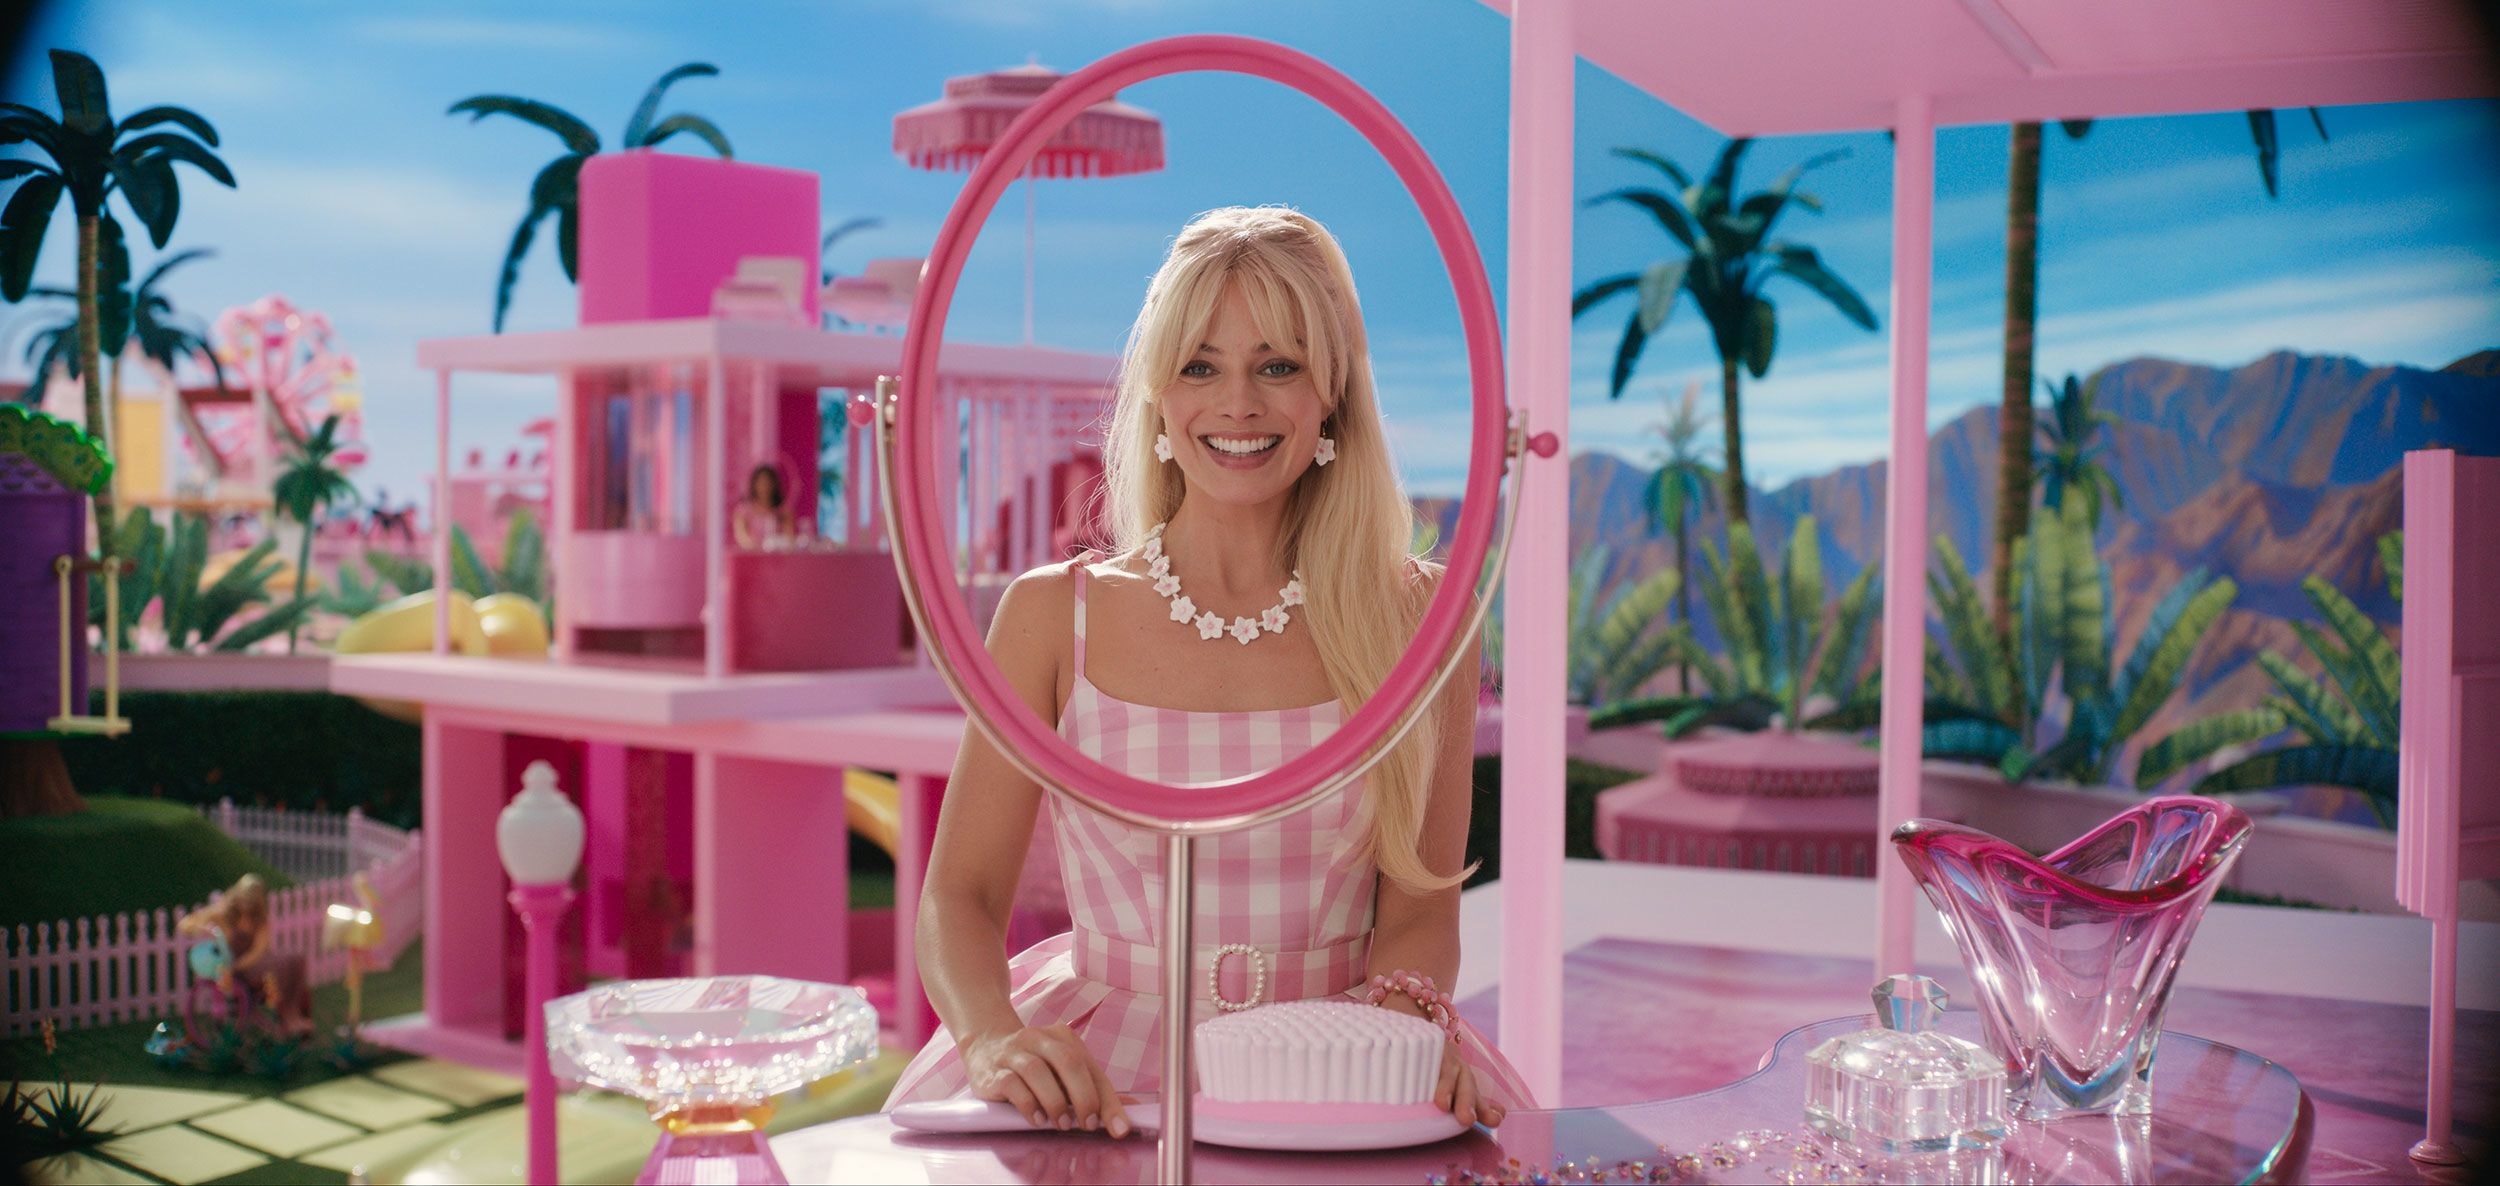 Margot Robbie smiles from a room inside her pink Dream House in the film Barbie.